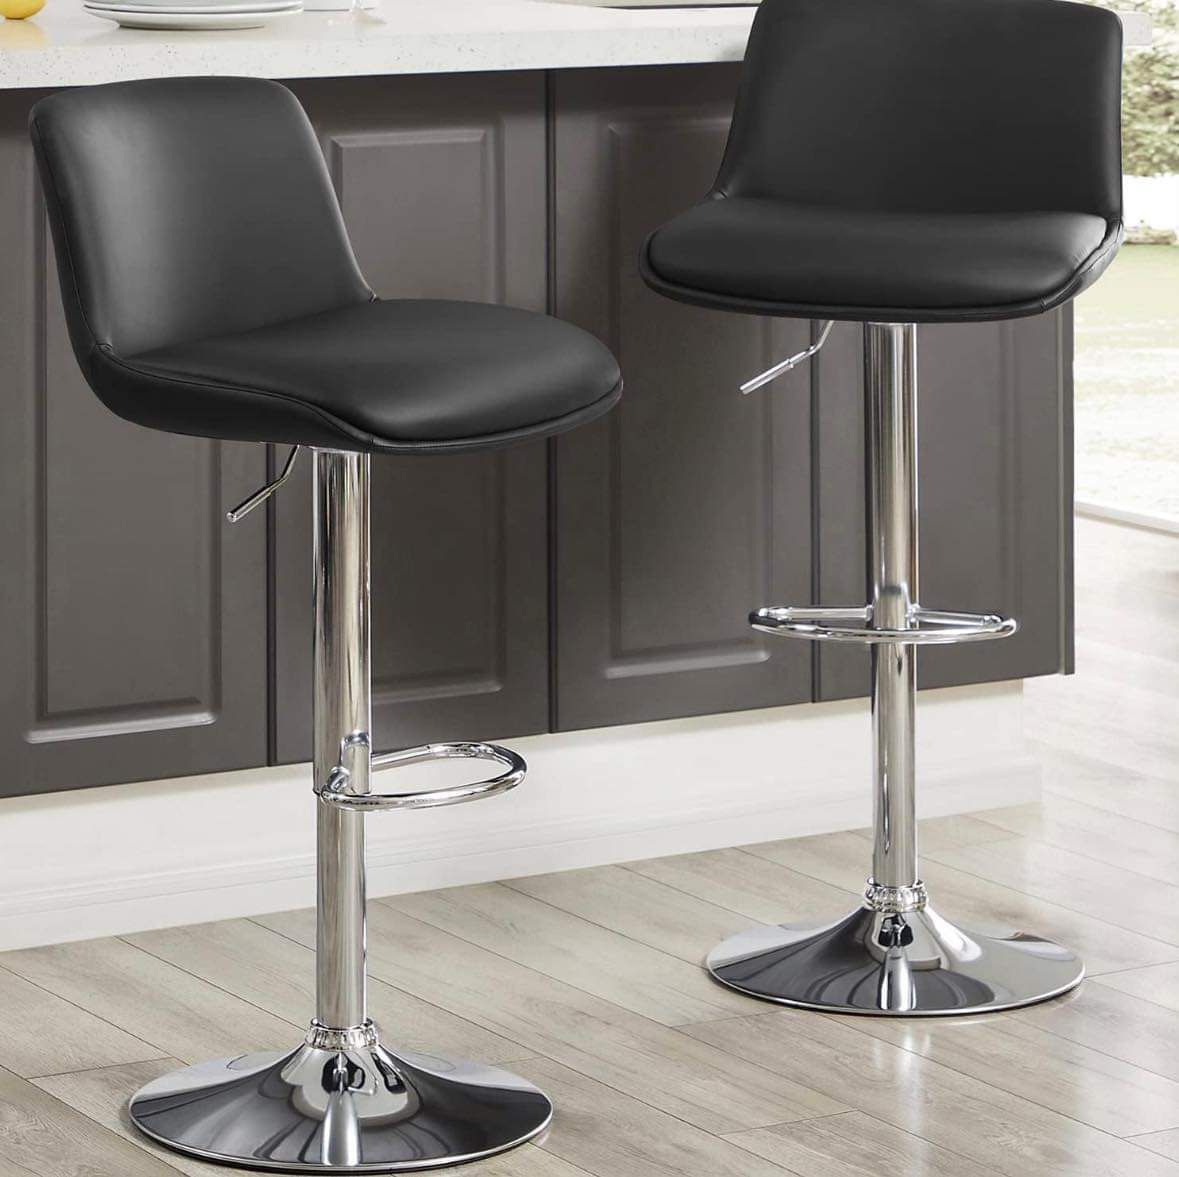 Modern Bar stools, swivel stools, Counter Height, Adjustable Height 24" to 34", Set of 2, PU in Black, E-18